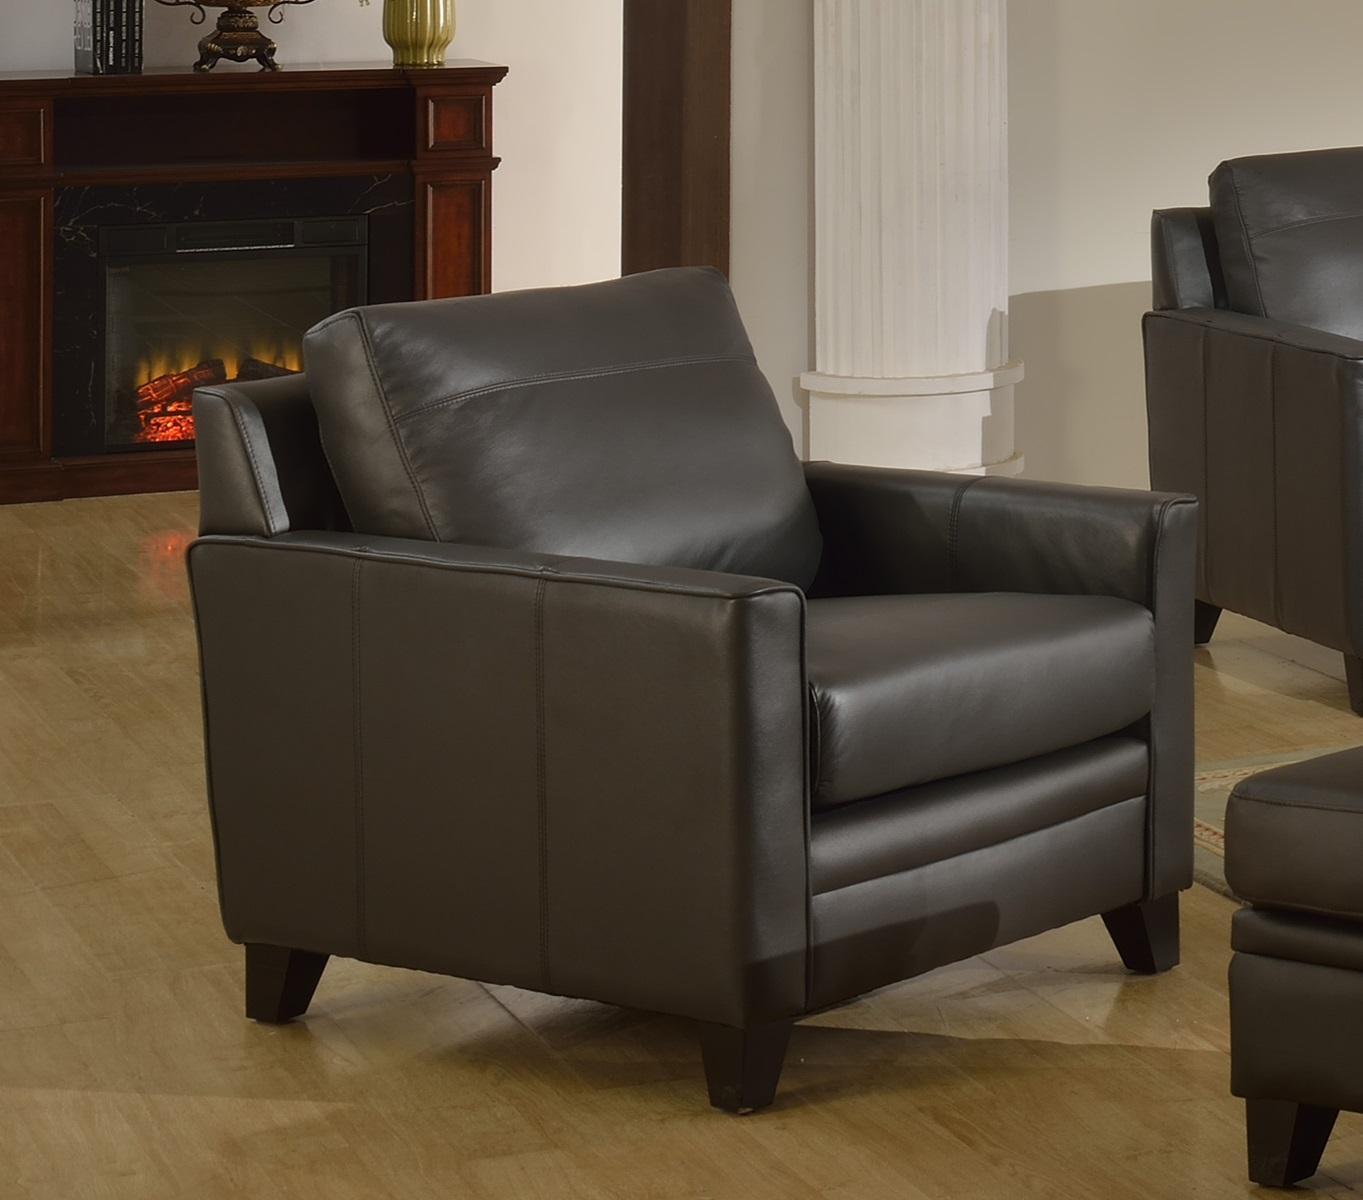 Leather Italia USA Cambria - Fletcher 6287B Chair in Charcoal